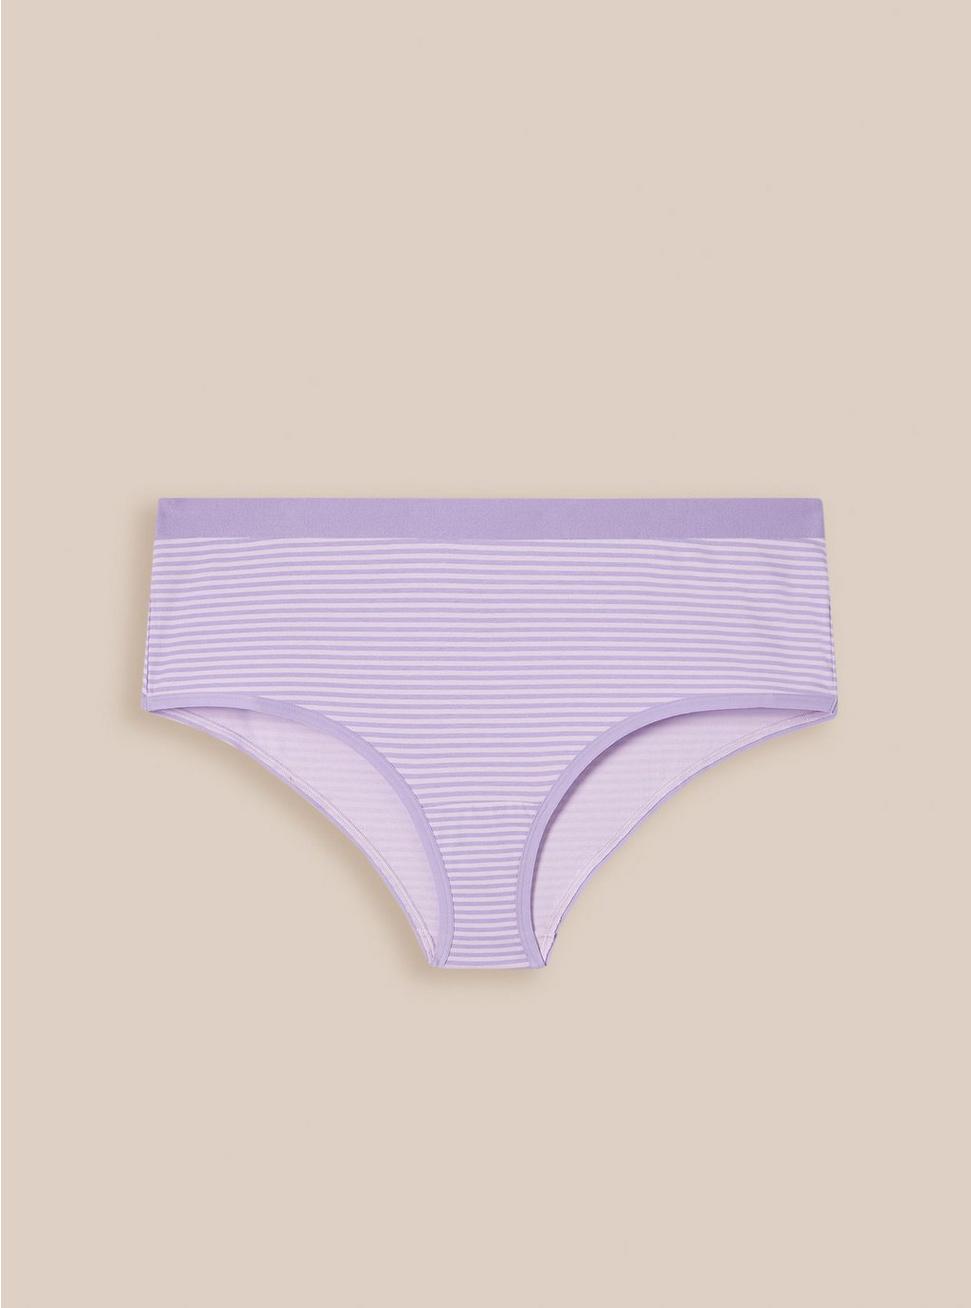 Cotton Mid-Rise Cheeky Panty, TEDDY STRIPE ORCHID BLOOM: LAVENDER, hi-res